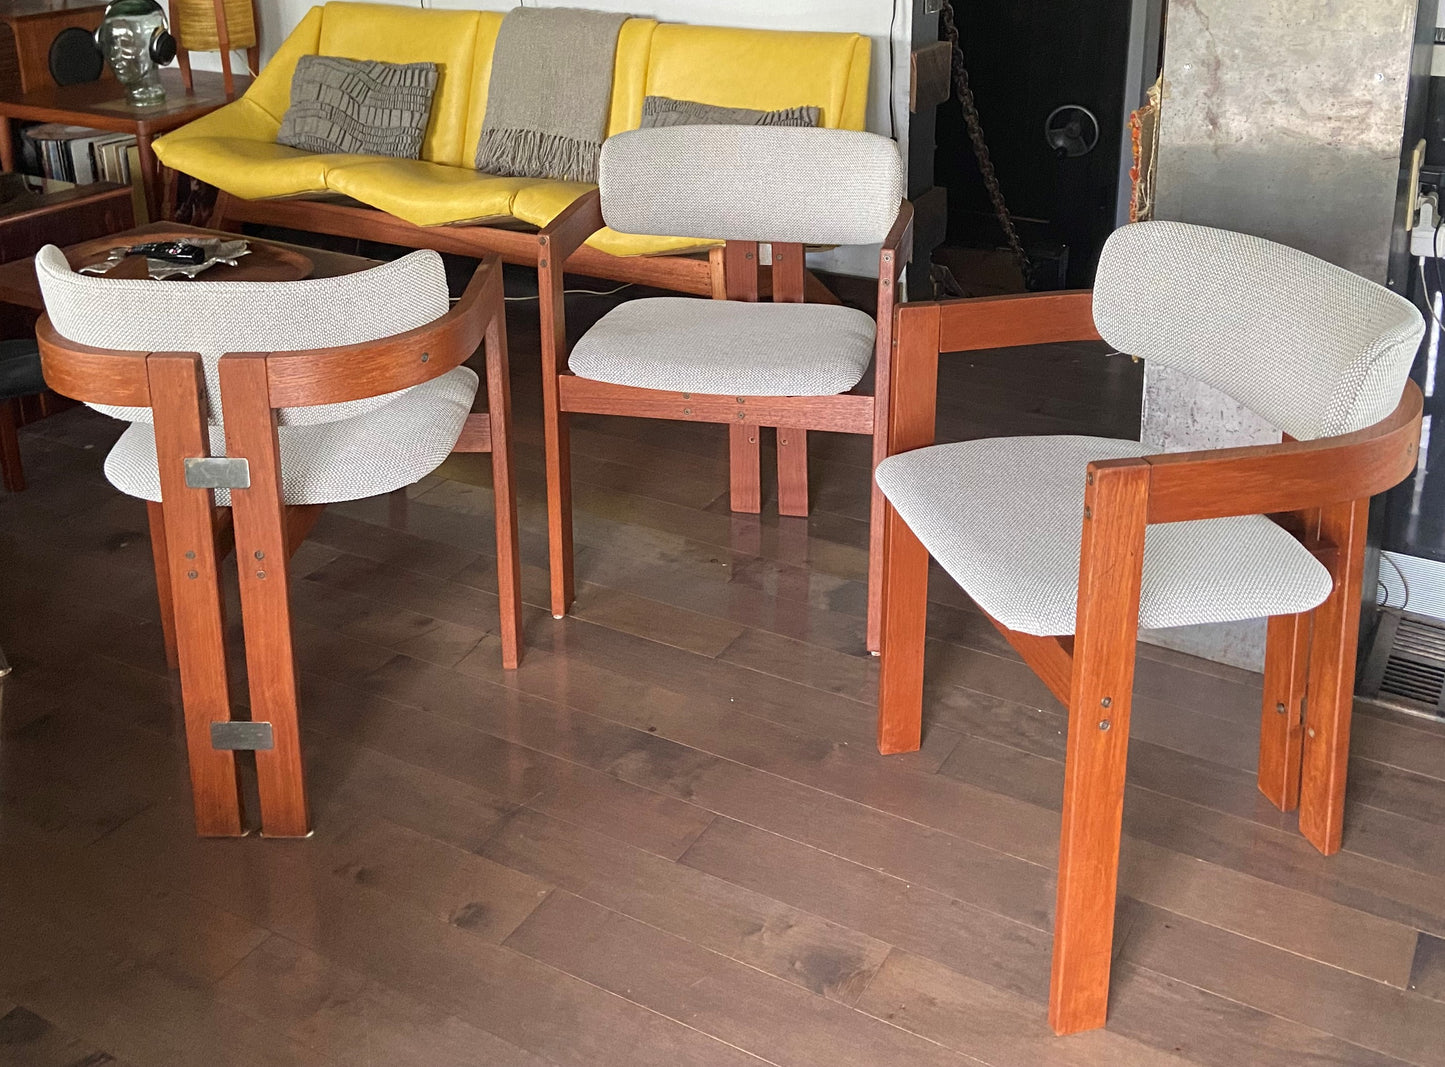 2 REFINISHED REUPHOLSTERED in Maharam Mid Century Modern teak armchairs, Perfect (3 pairs available)